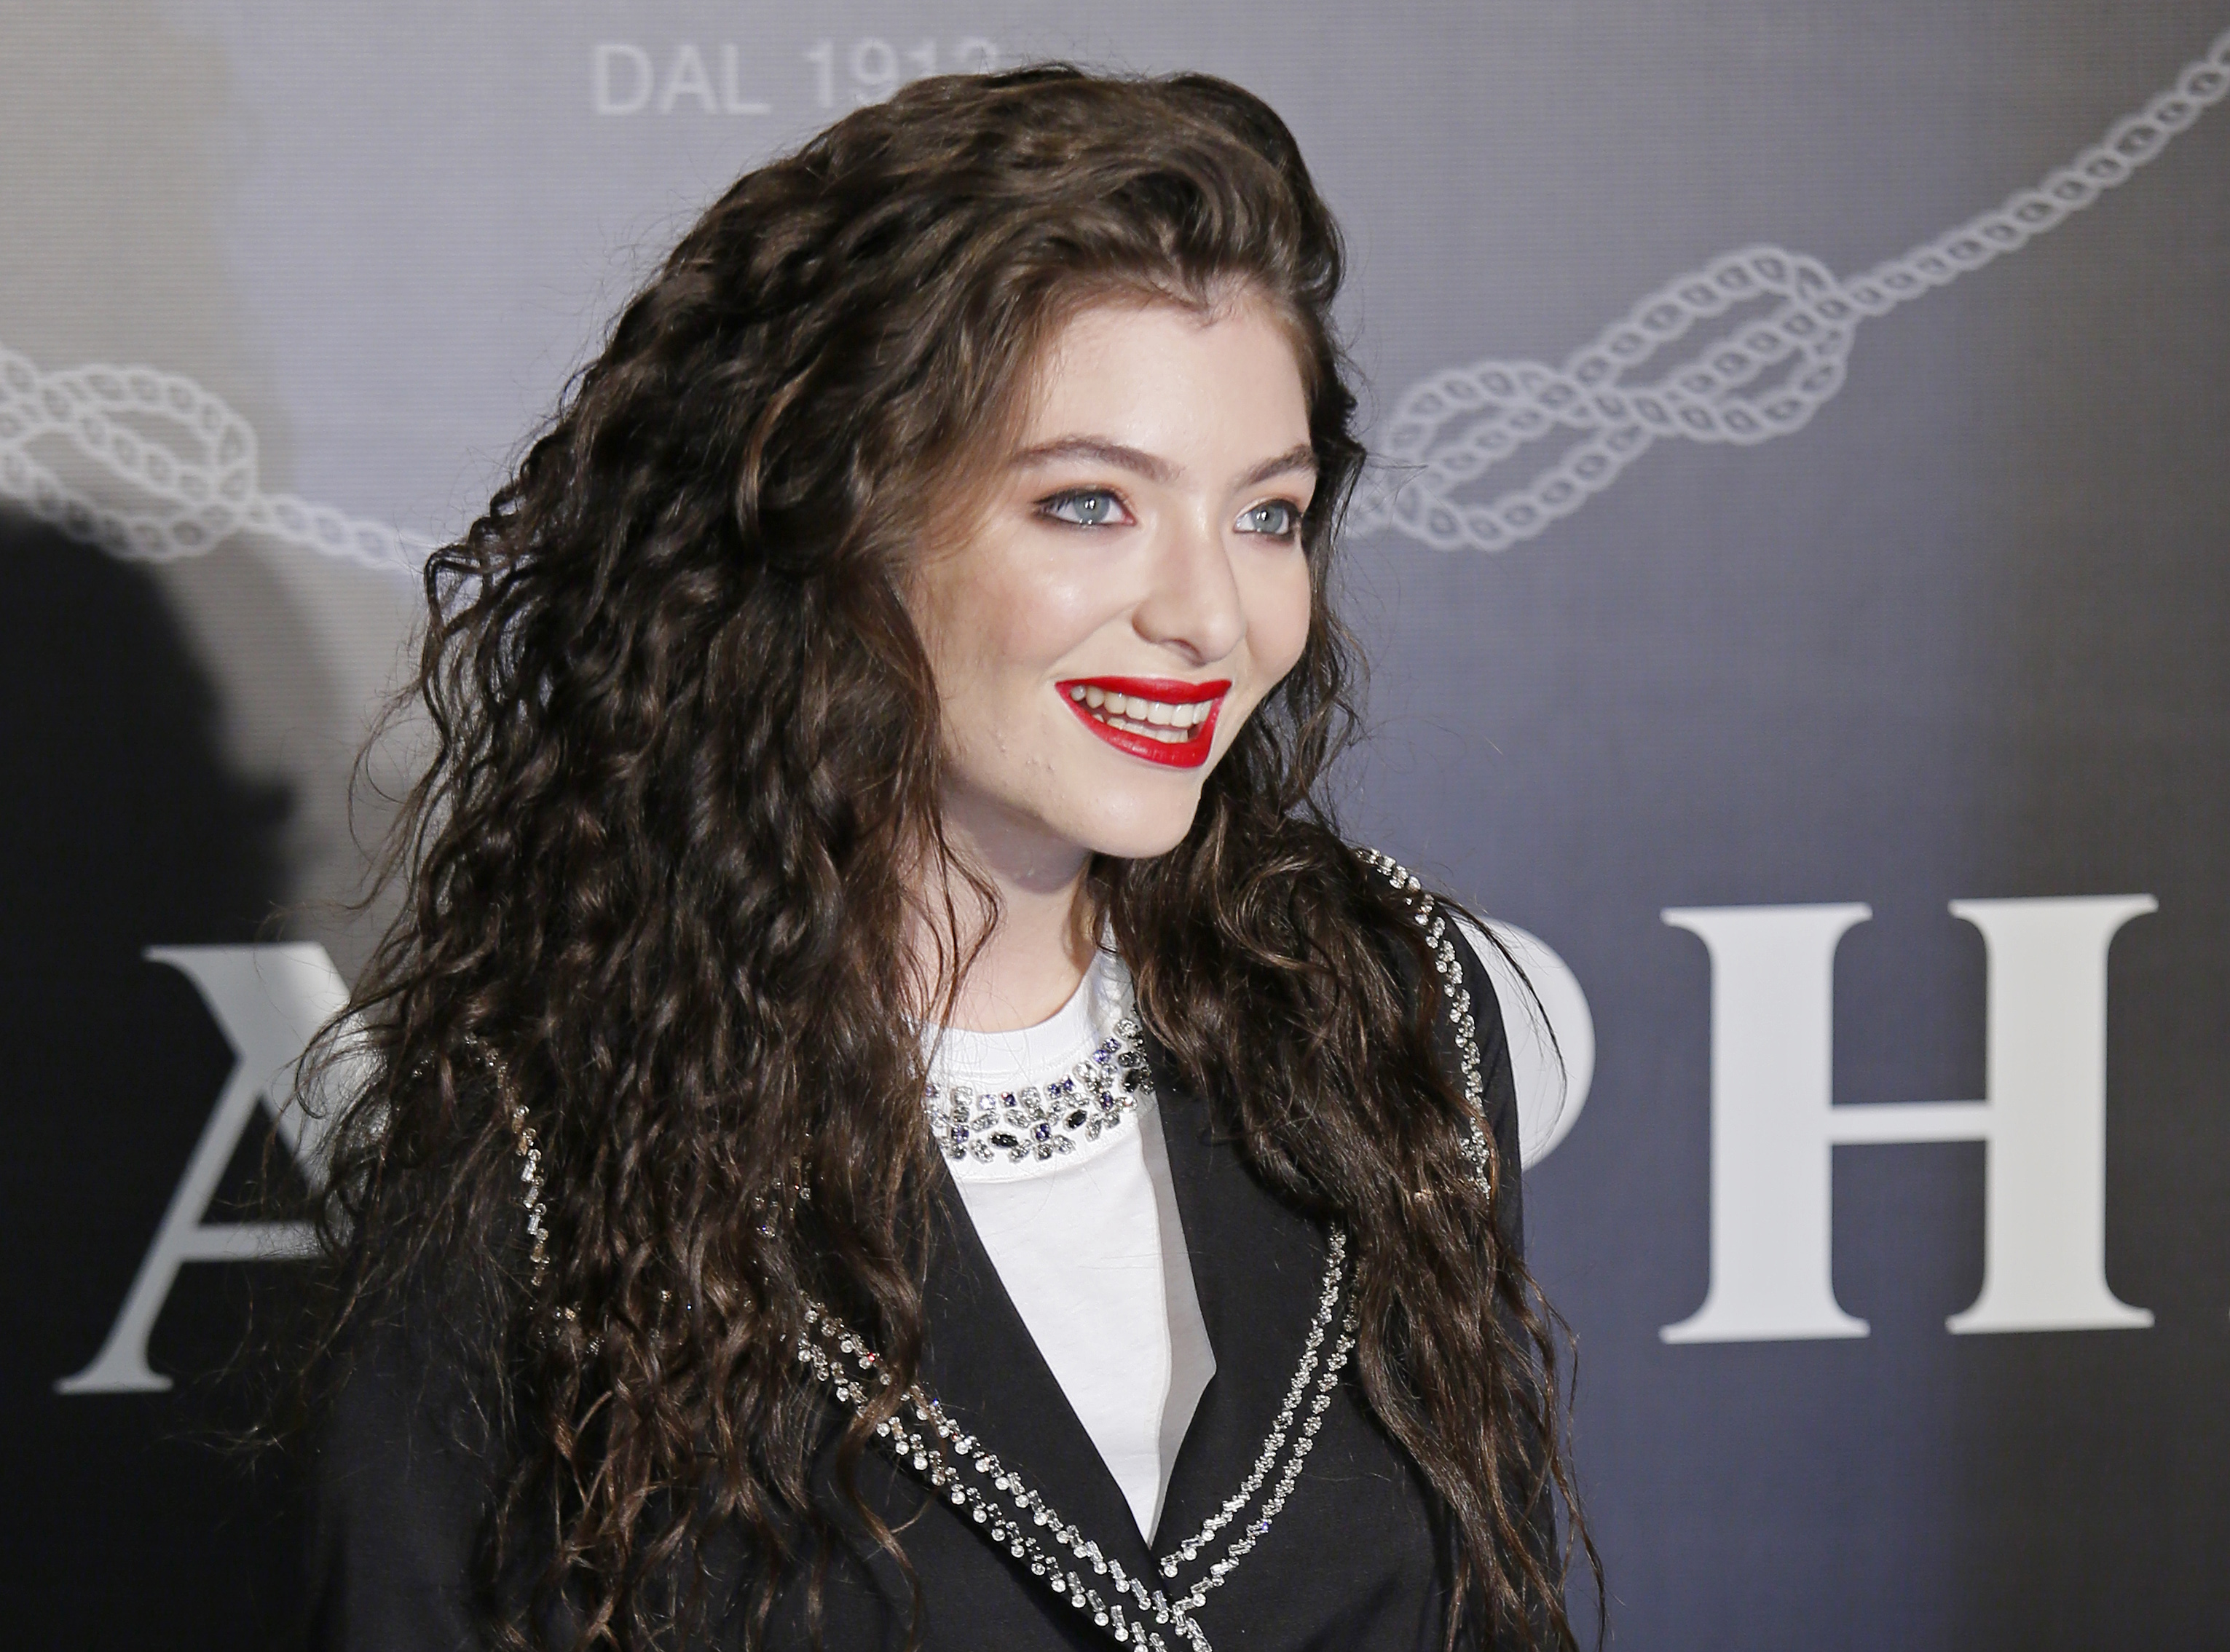 Singer Lorde poses for photographers during an promotional event in Hong Kong Tuesday, Nov. 18, 2014. (Vincent Yu&mdash;AP)